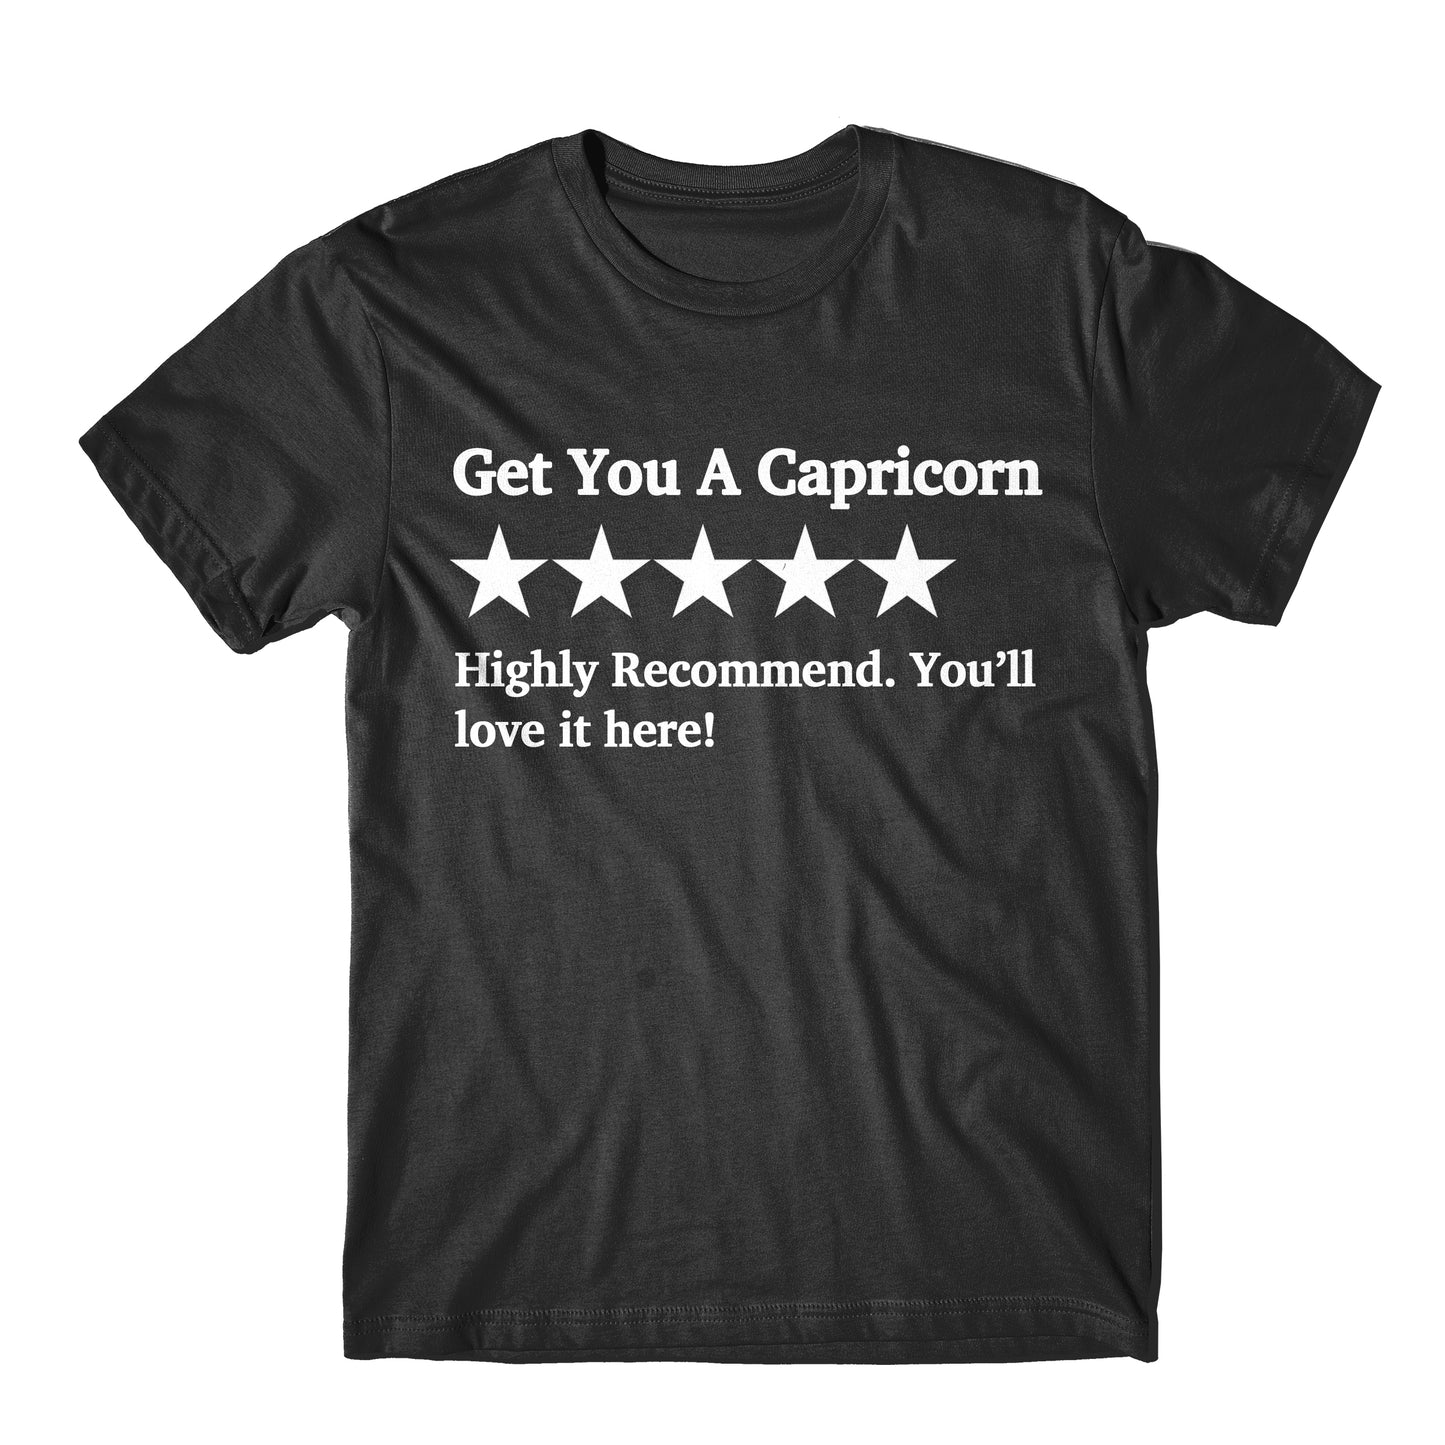 "Get You A Capricorn Five Star Rating" Tee